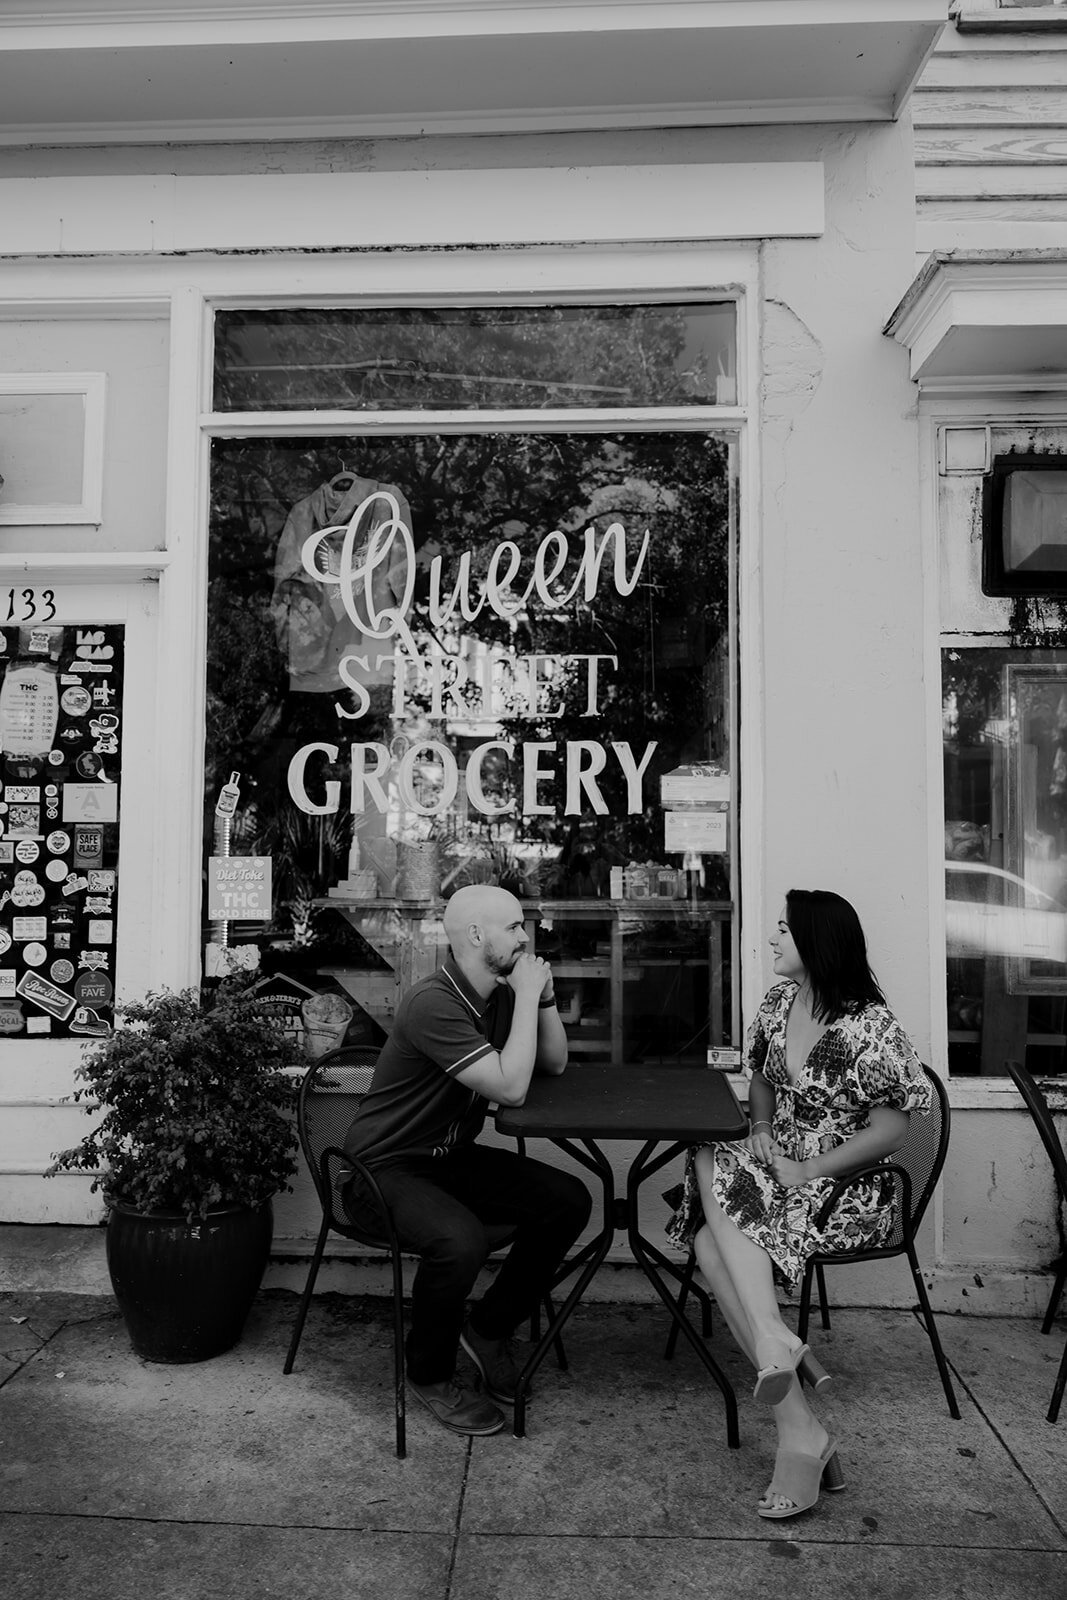 Couple sitting at table outside with Queen Street Grocery written on window in background